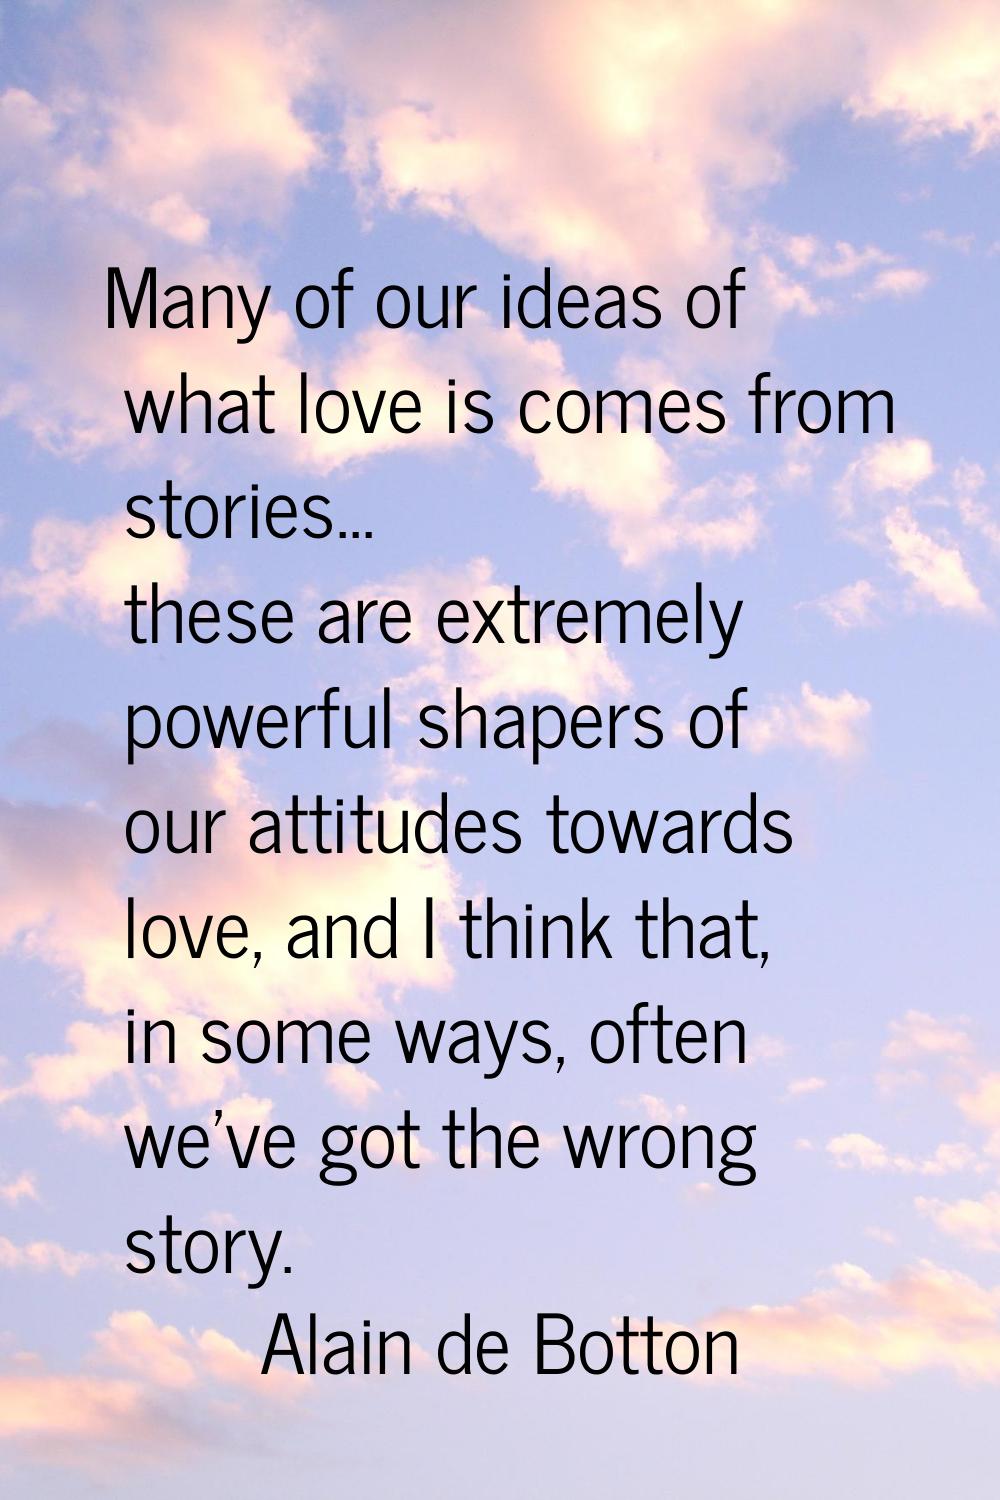 Many of our ideas of what love is comes from stories... these are extremely powerful shapers of our